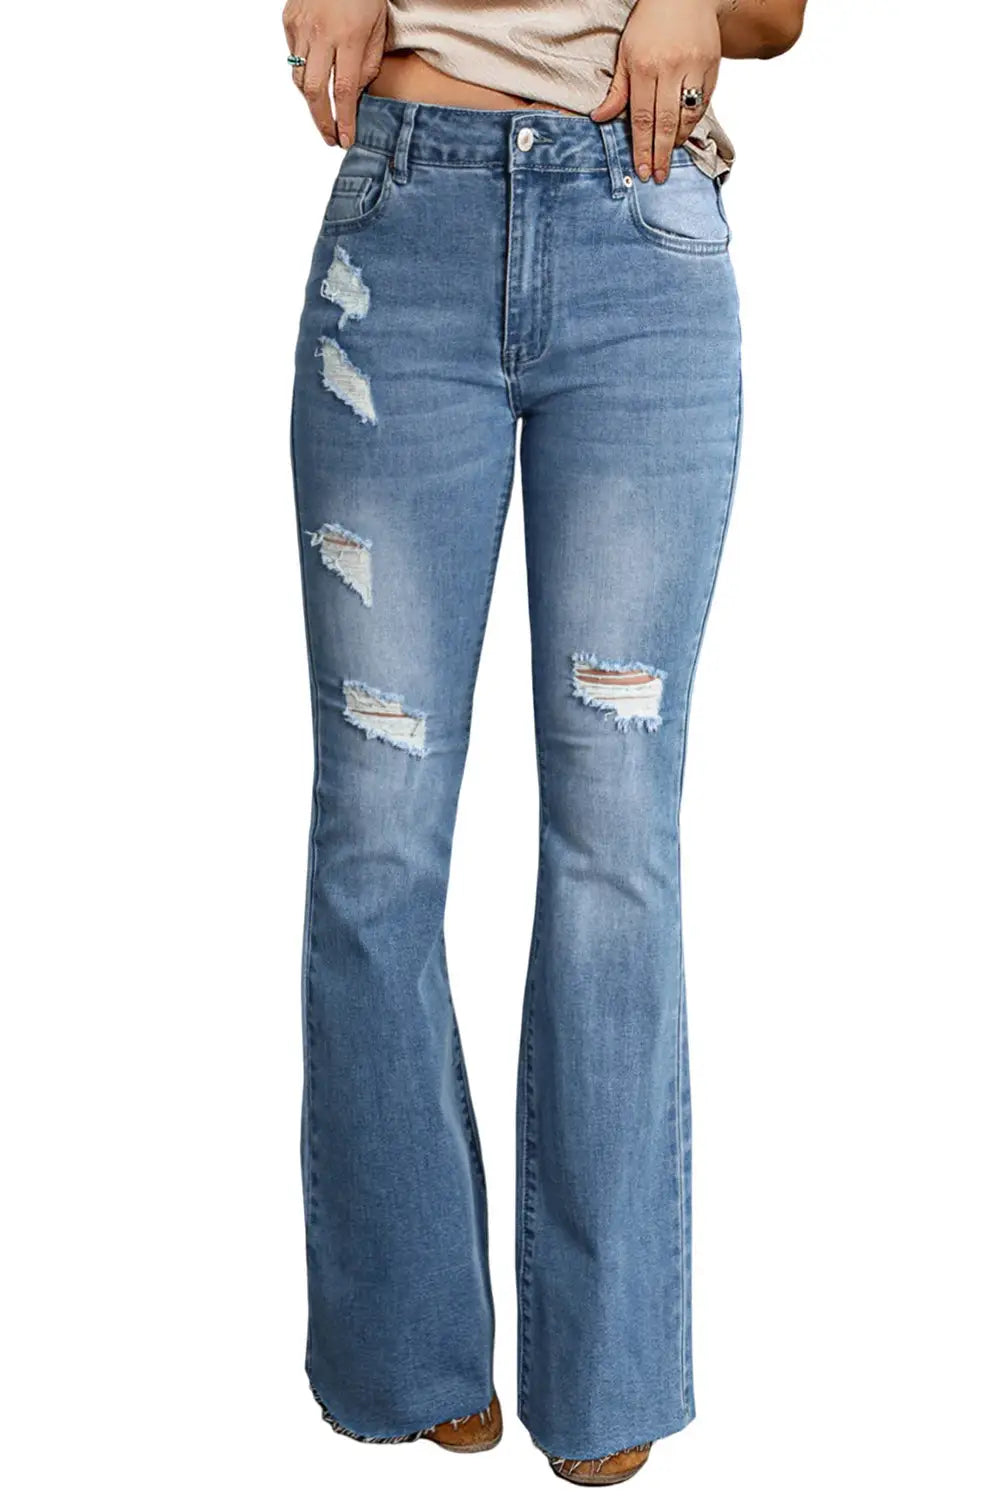 Sky blue dark wash mid rise flare jeans